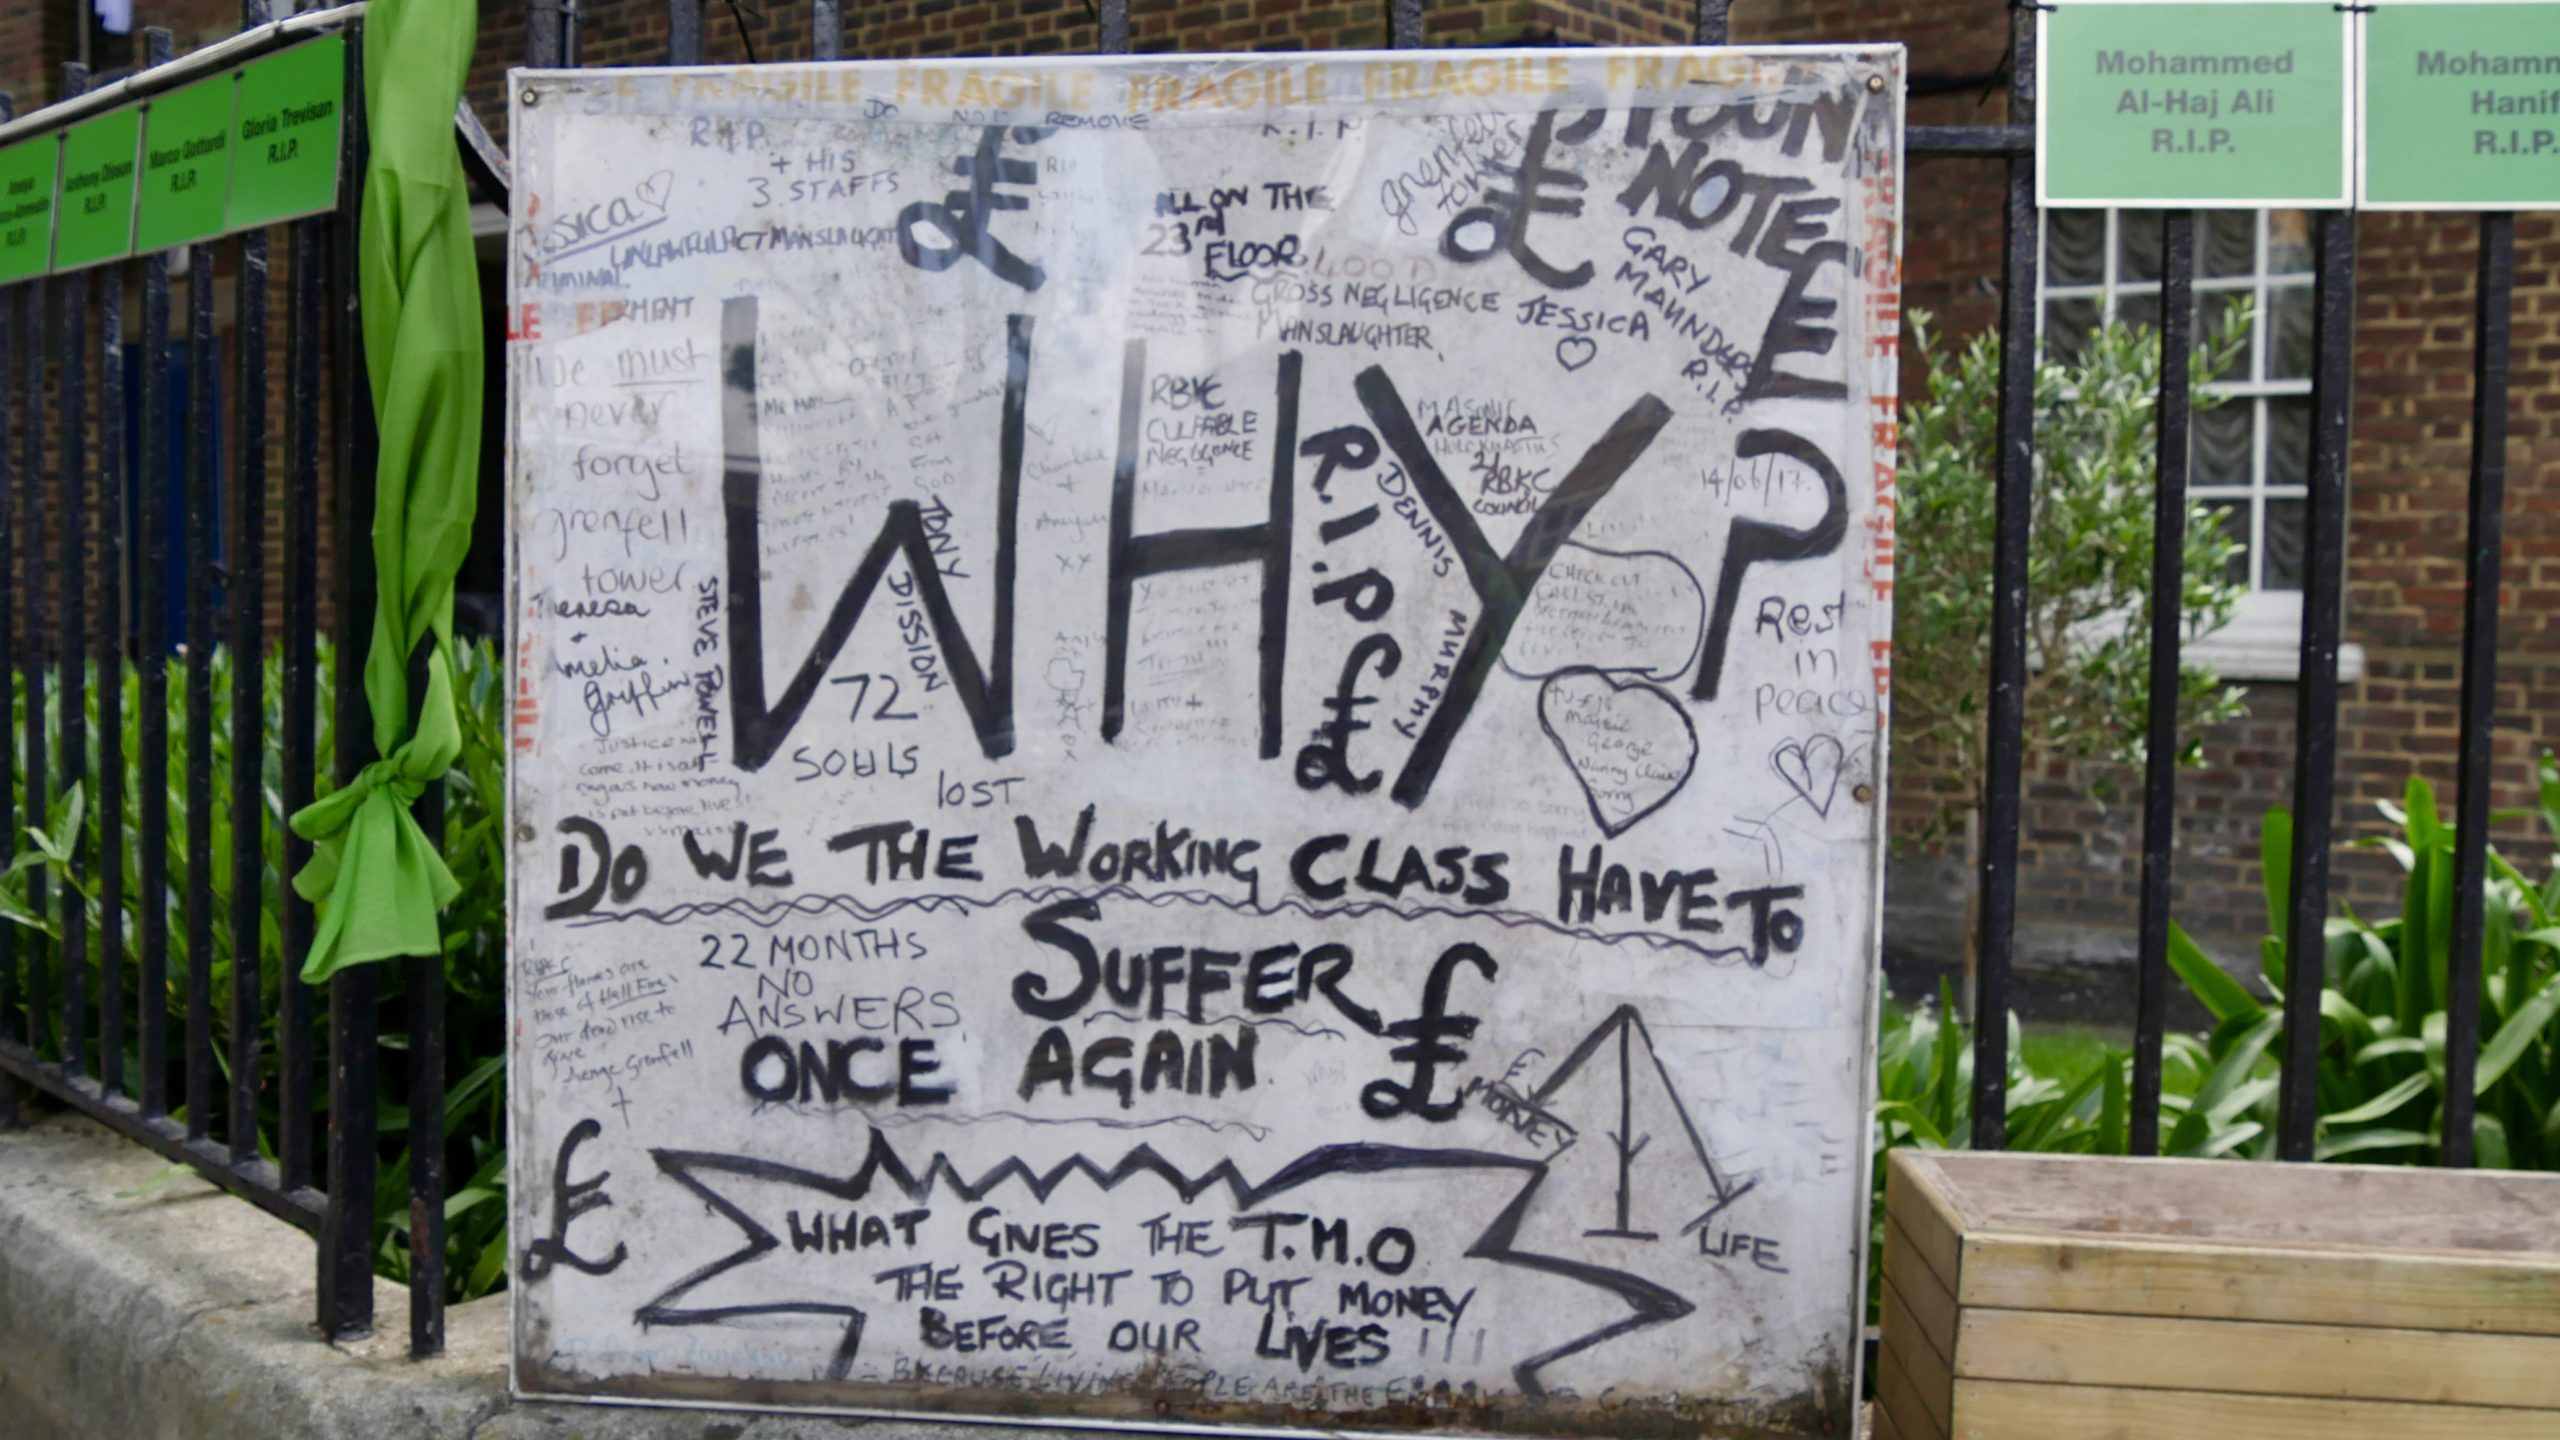 Handwritten sign sits on the corner of Bramley Road, leading to Grenfell Tower. It states "Why do we, the working class, have to suffer once again?"